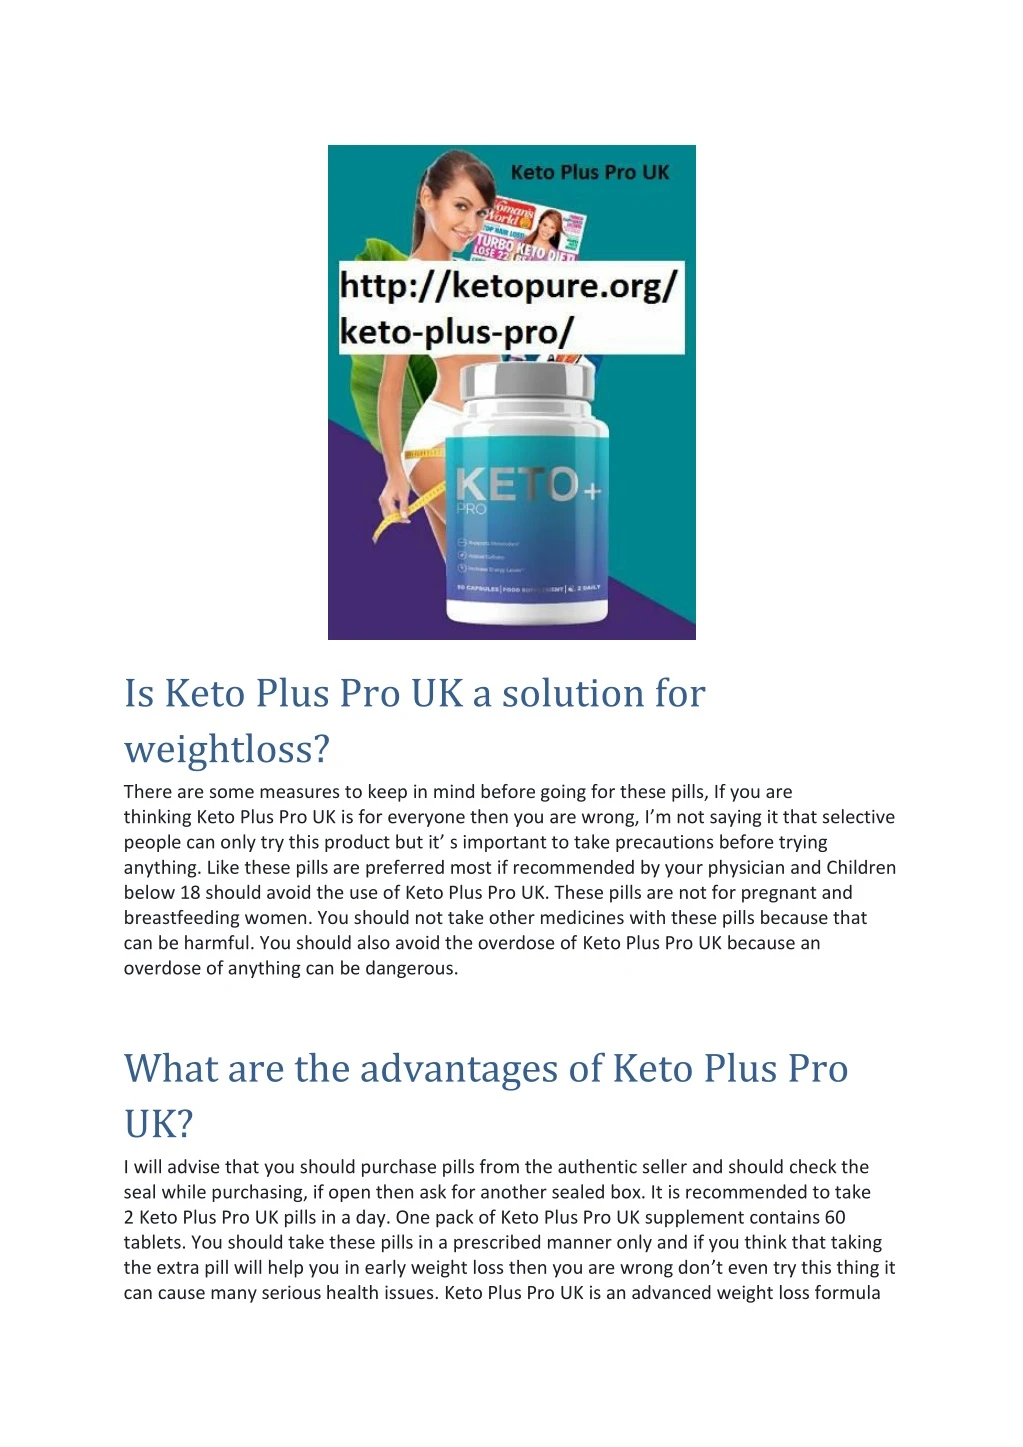 is keto plus pro uk a solution for weightloss